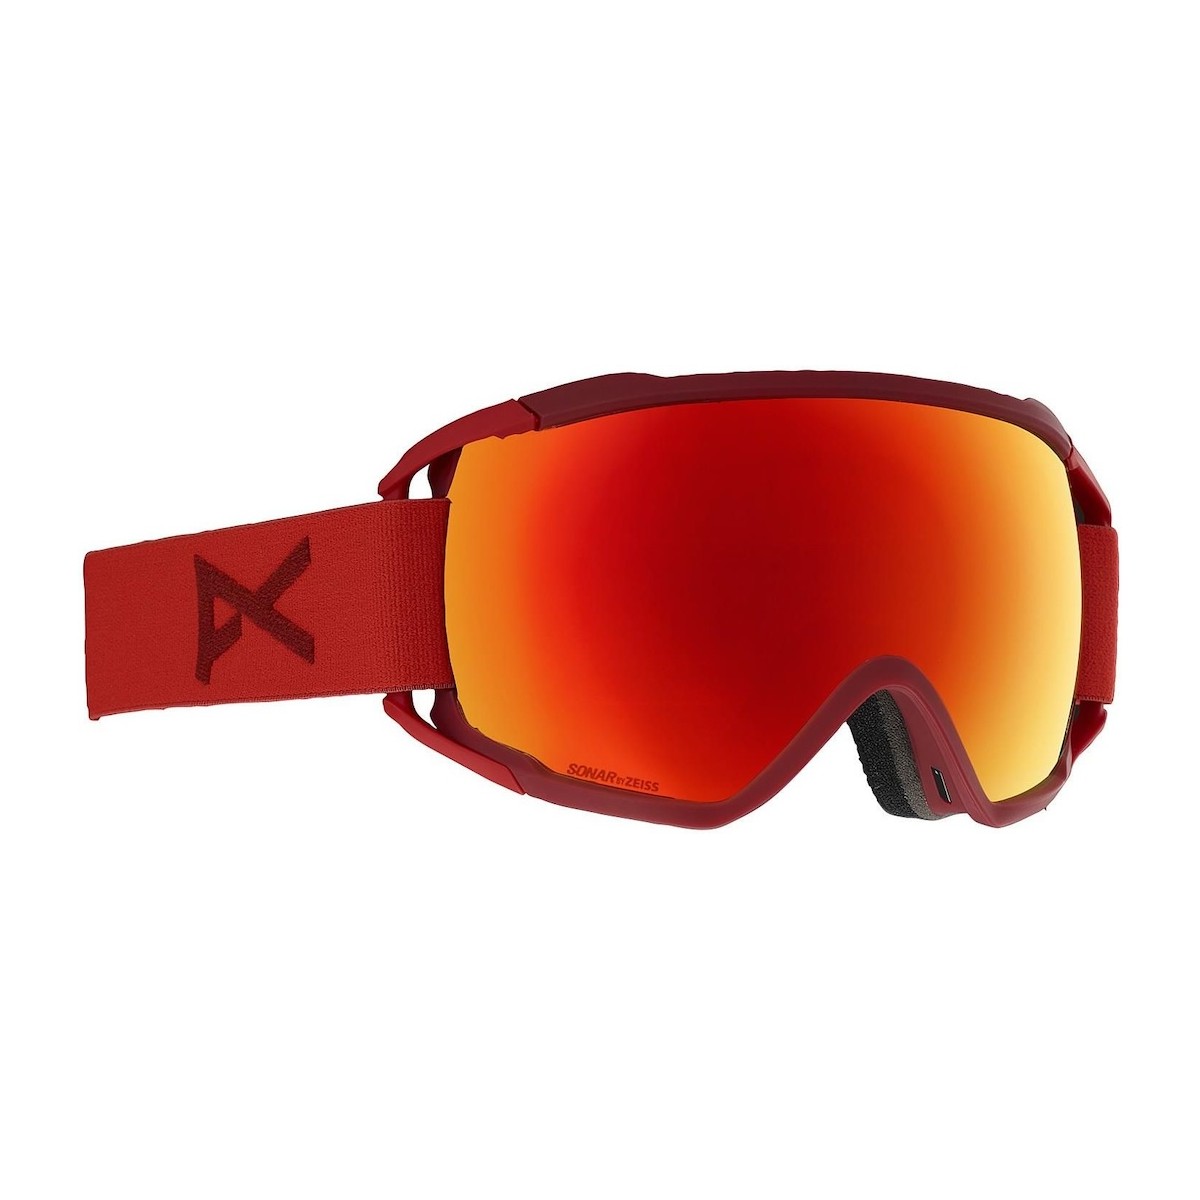 ANON CIRCUIT W/SONAR snow goggles - red